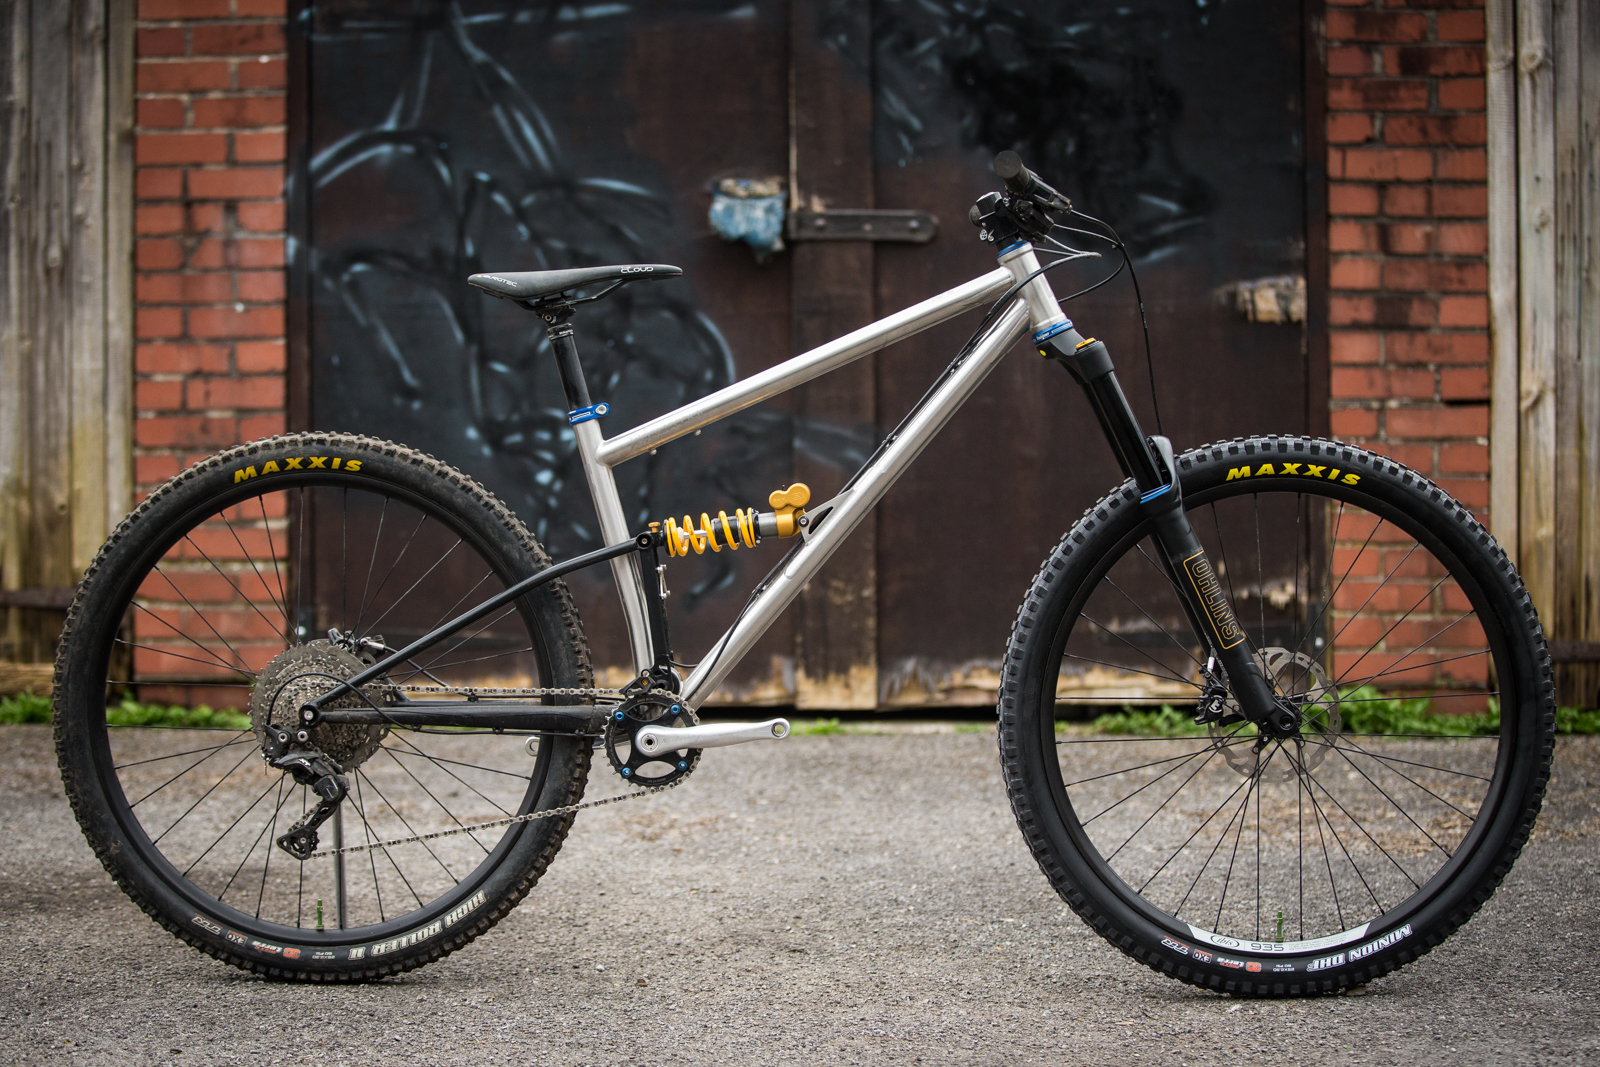 Starling Cycles Limited Edition Stainless Murmur - The 